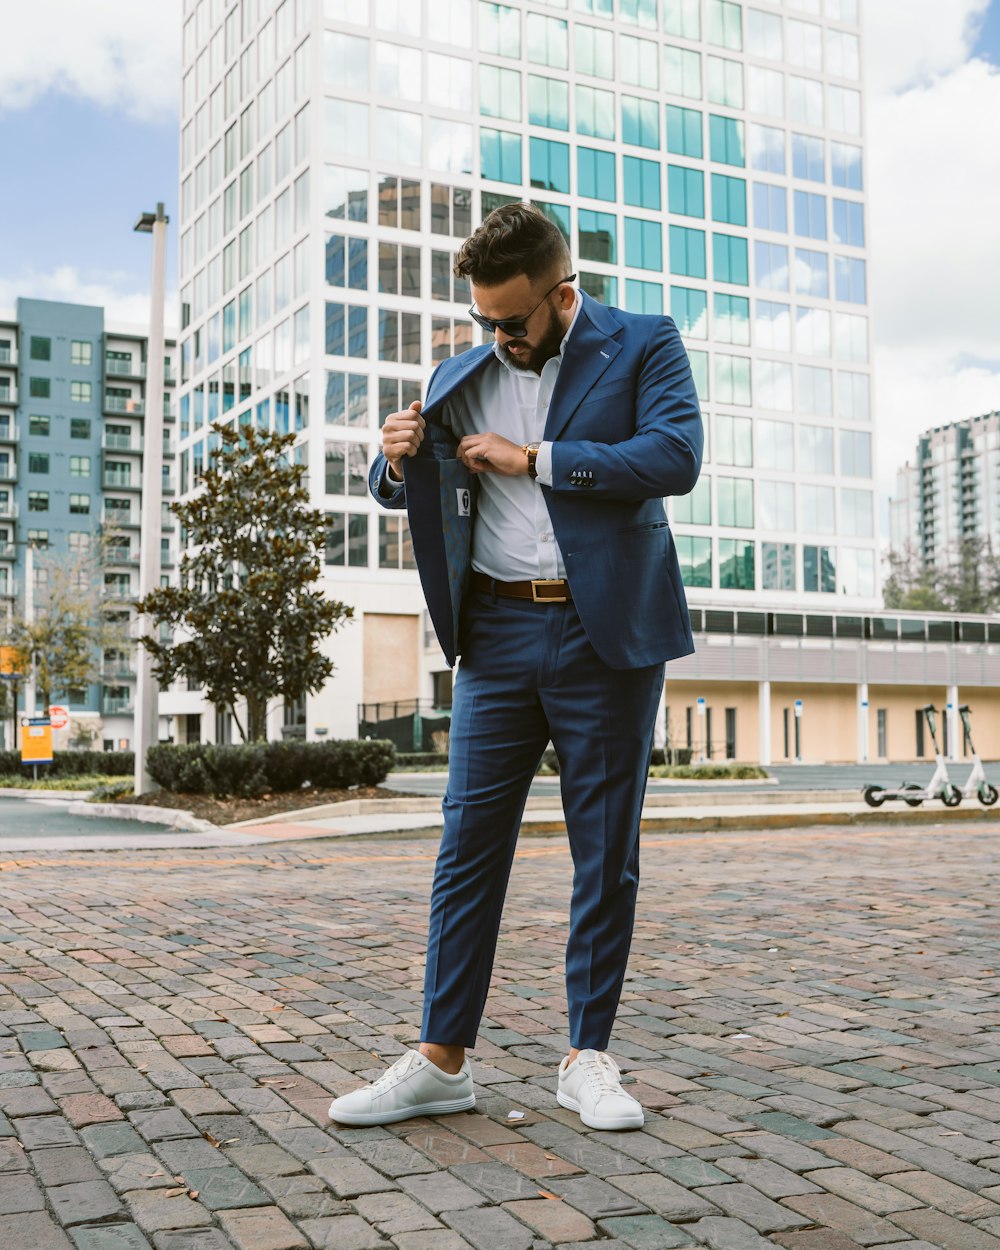 A man in a blue suit and white shoes photo – Free Suit Image on Unsplash